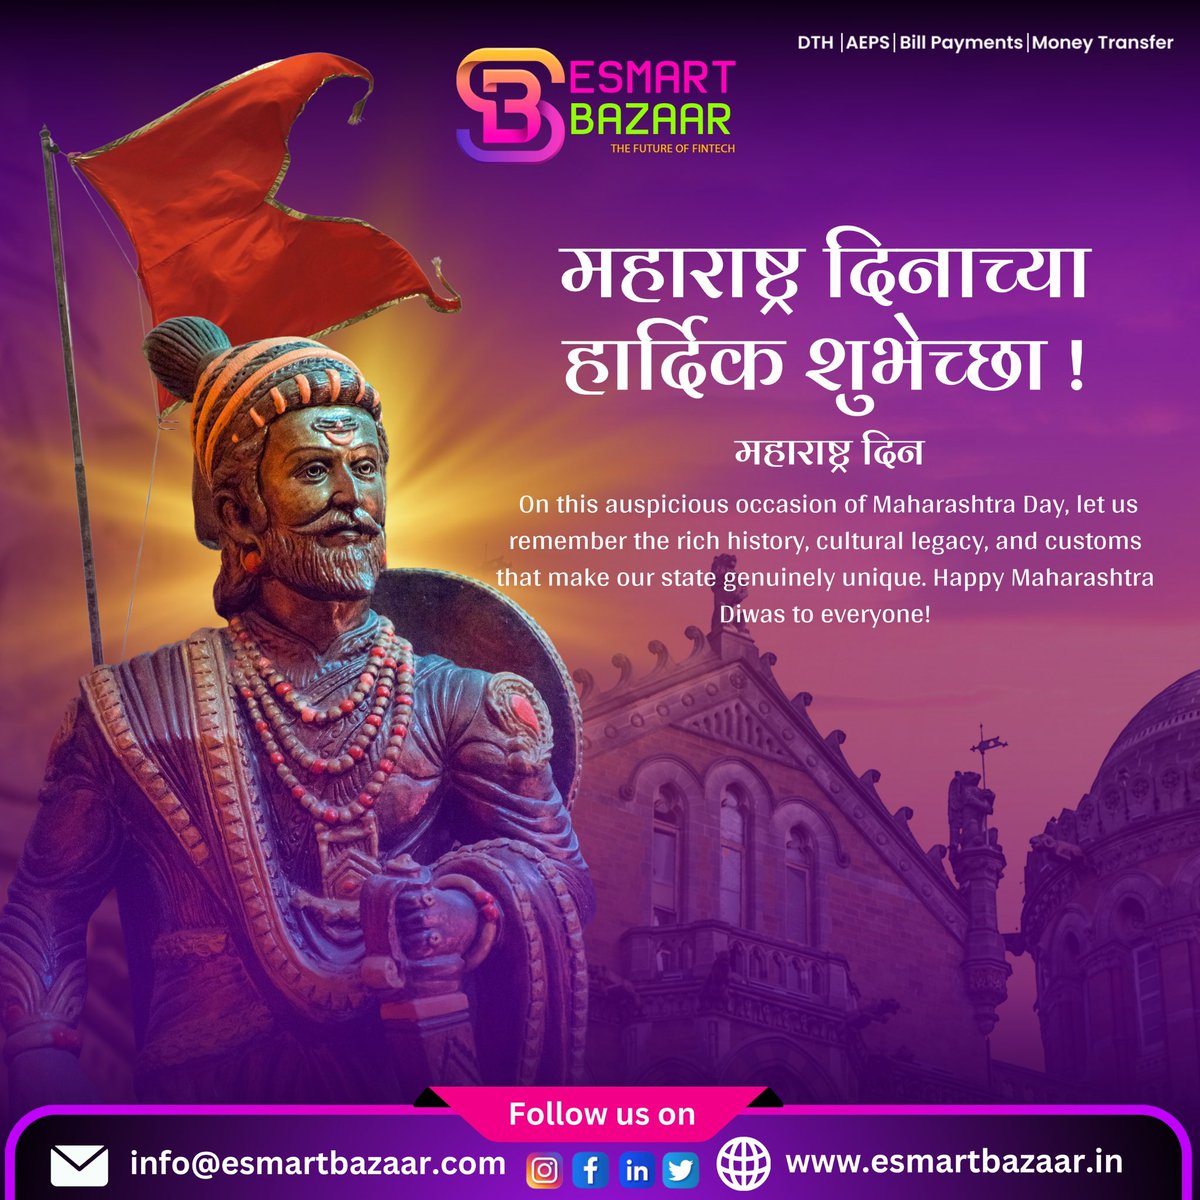 On this auspicious occasion of Maharashtra Day, let us remember the rich history, cultural legacy, and customs that make our state genuinely unique. 𝗙𝗼𝗿 𝗺𝗼𝗿𝗲 𝗶𝗻𝗳𝗼𝗿𝗺𝗮𝘁𝗶𝗼𝗻 𝗰𝗮𝗹𝗹 📞+𝟵𝟭 𝟳𝟴𝟬𝟬𝟲 𝟬𝟲𝟳𝟴𝟬 . . #maharashtradin #fintech #ExploreMore